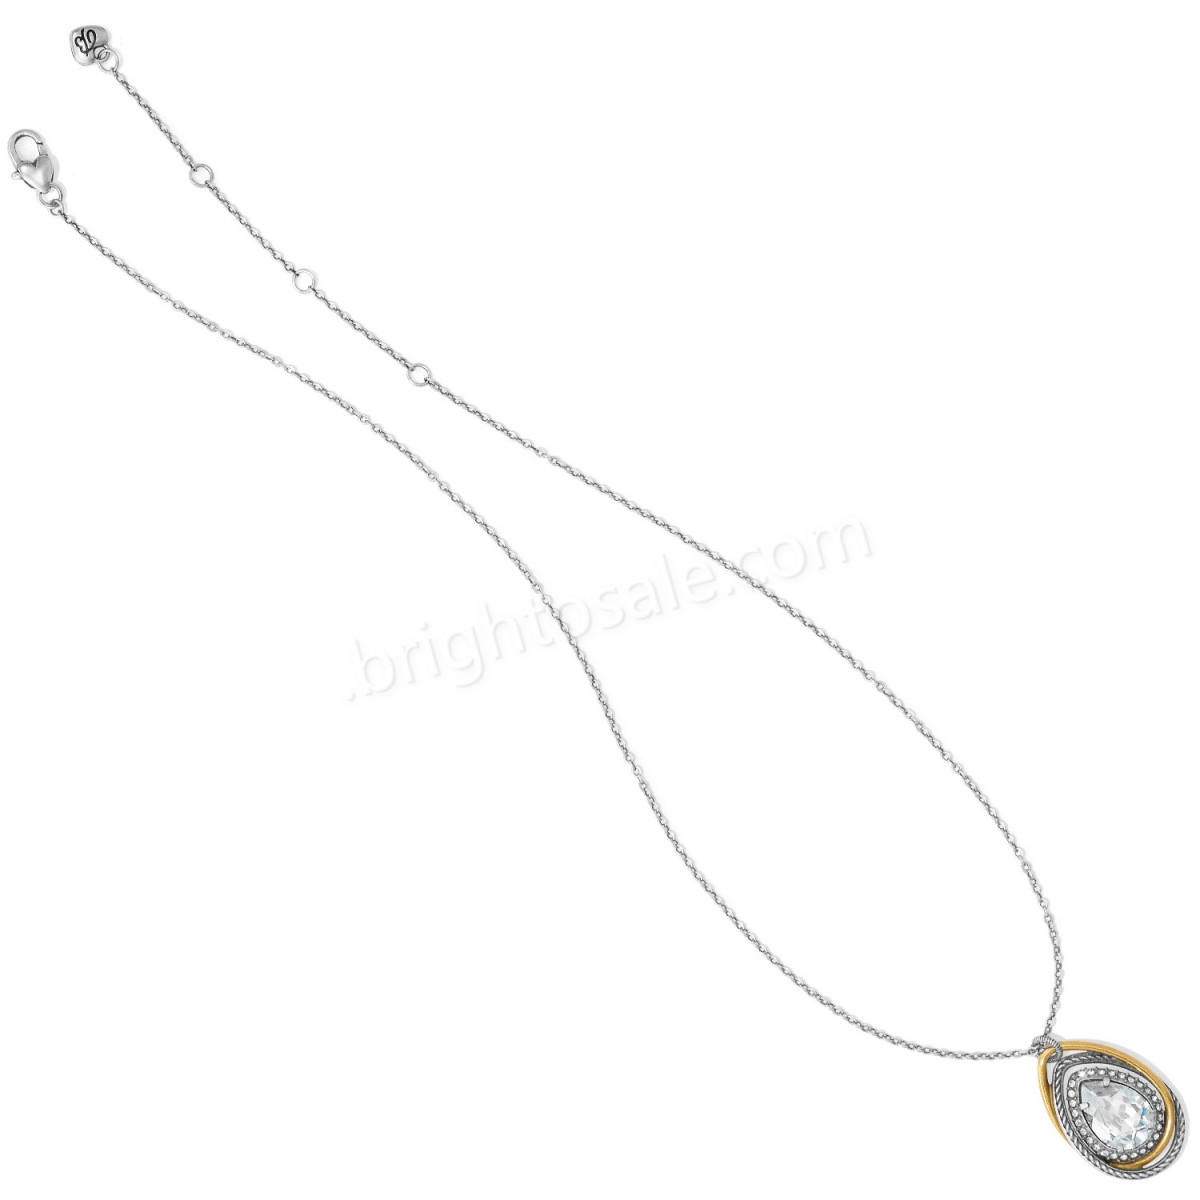 Brighton Collectibles & Online Discount Neptune's Rings Gem Teardrop Necklace - -2